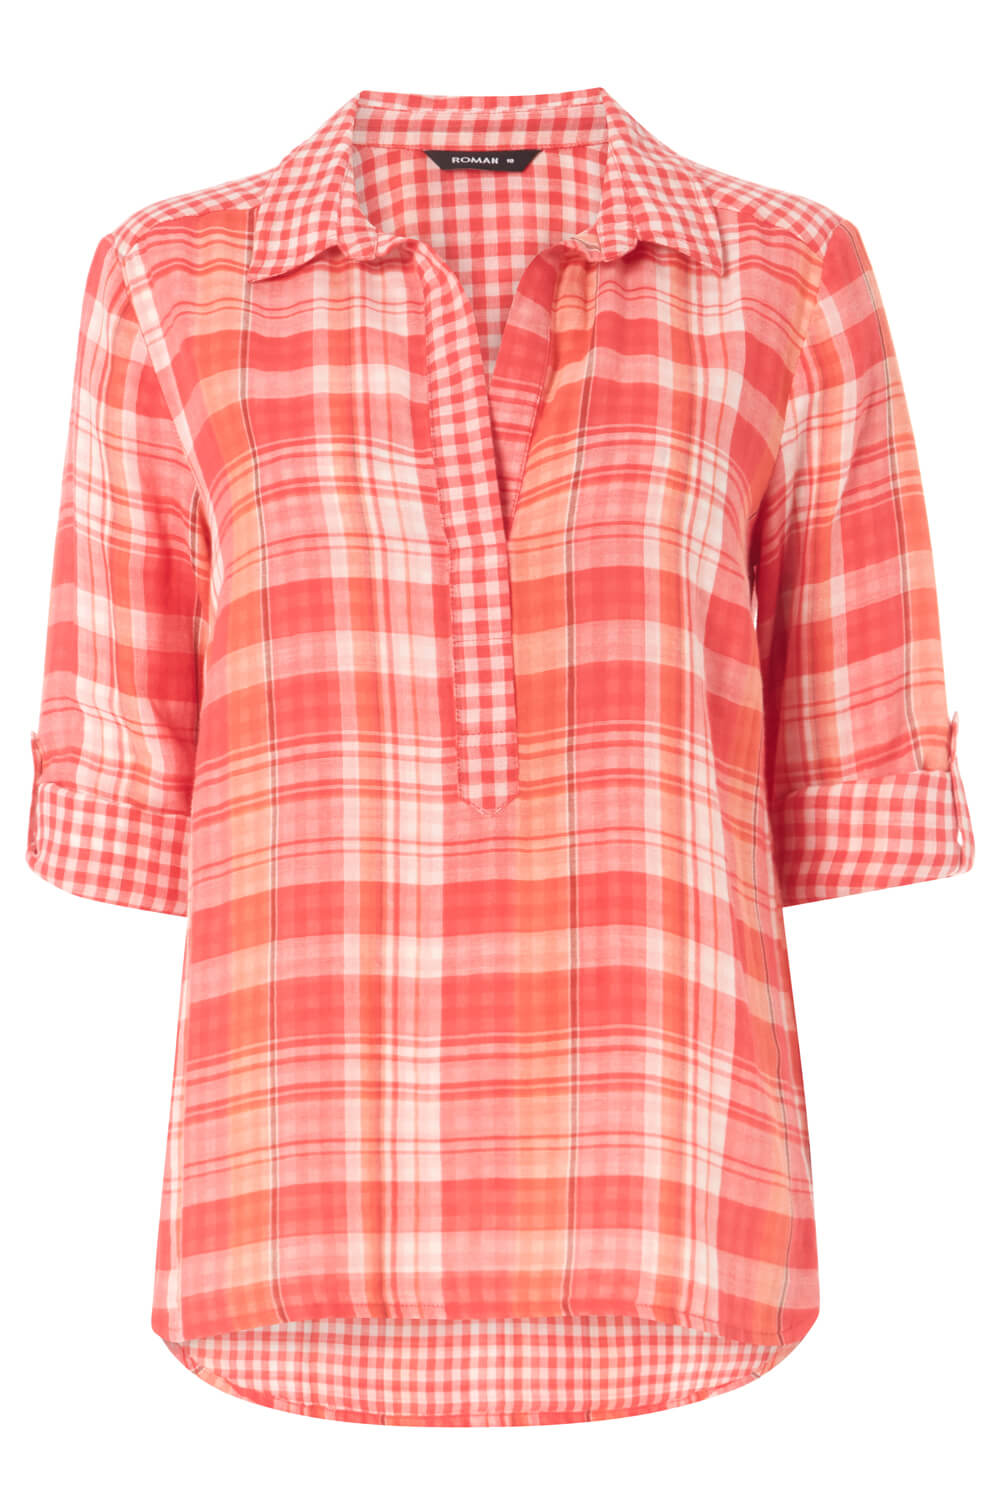 CORAL Contrast Check Print Overshirt, Image 5 of 9